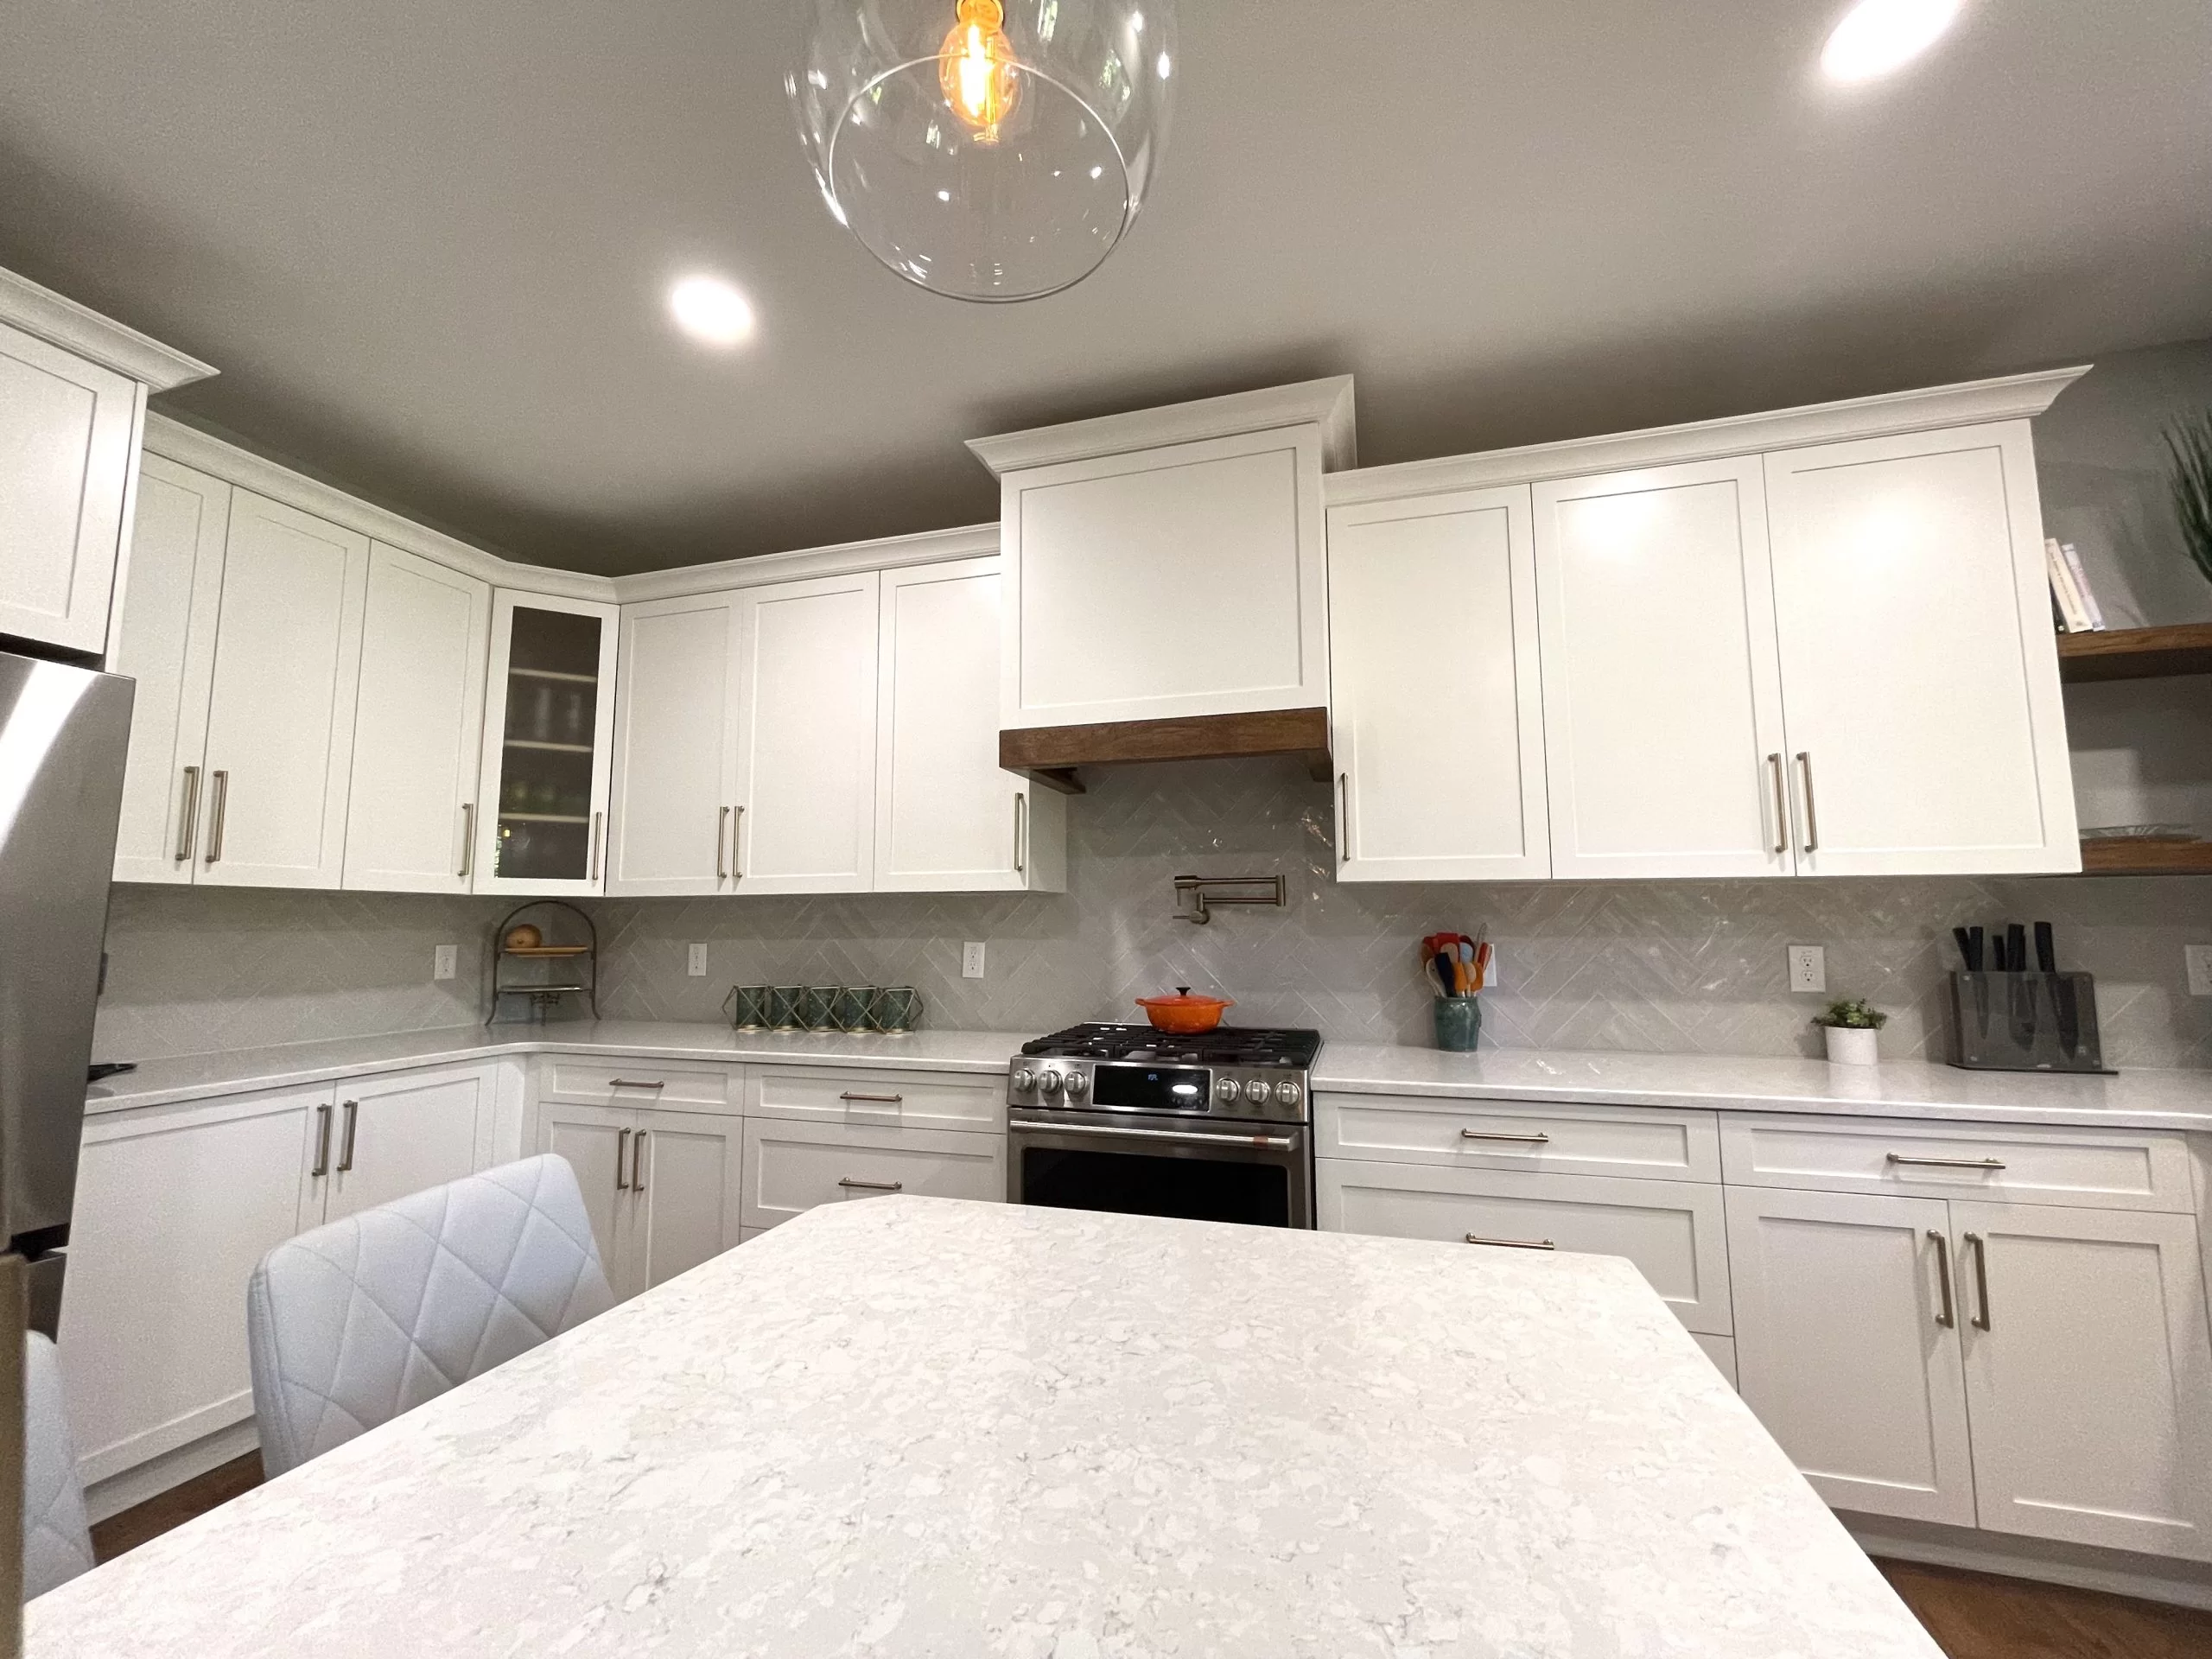 Newly design and remodeled kitchen by Riverbirch of Raleigh, NC